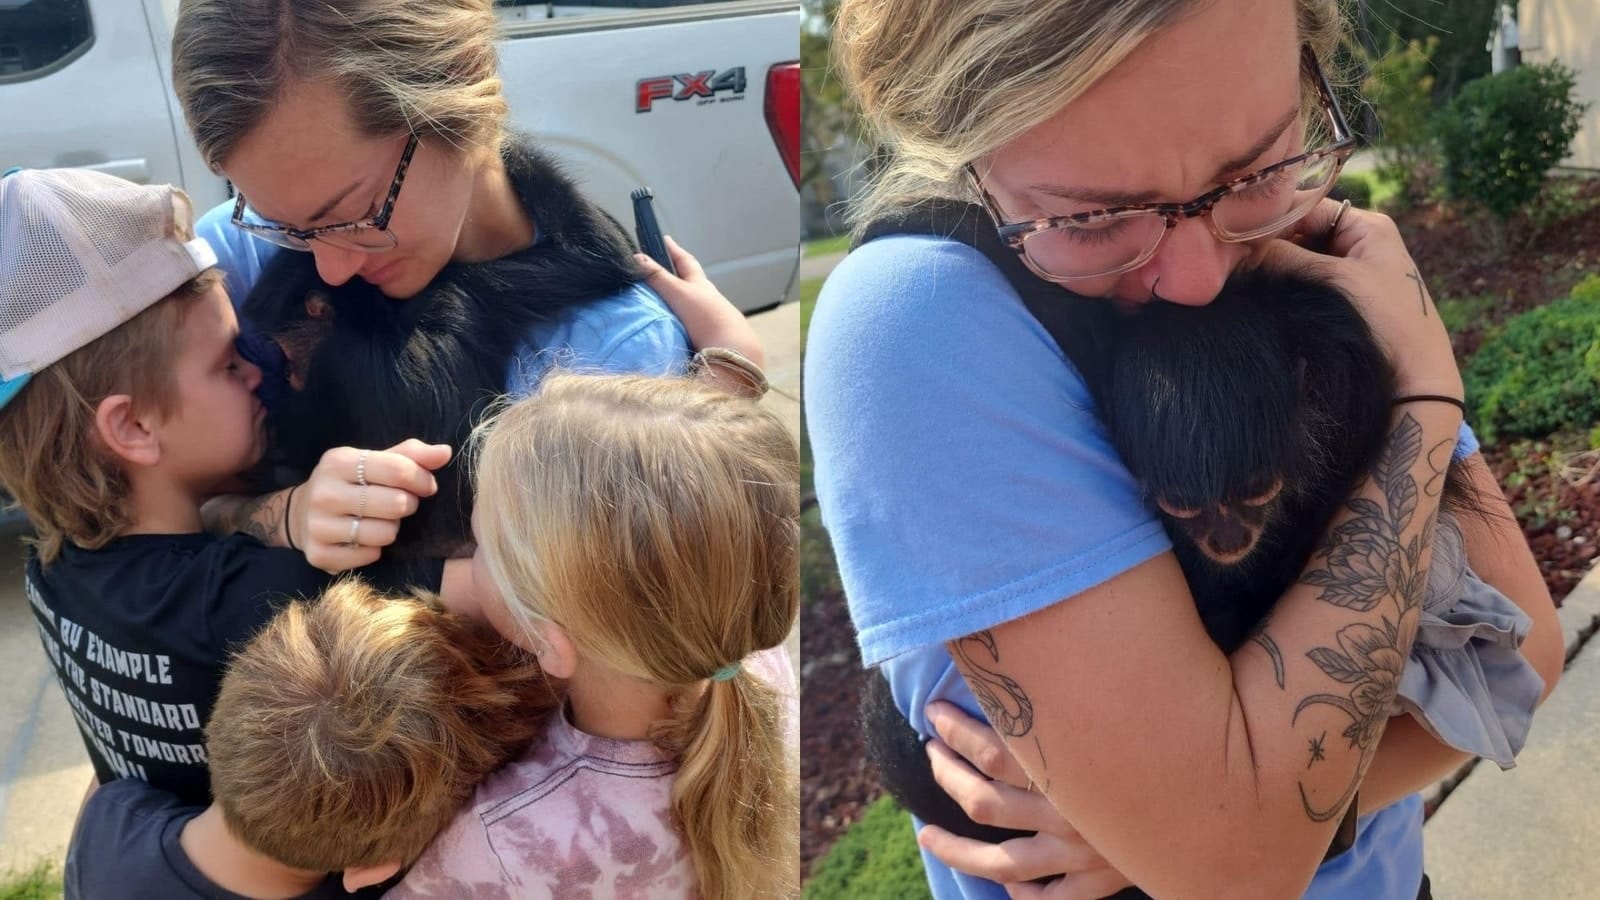 Mississippi family reunites with missing pet monkey after 24-hour search